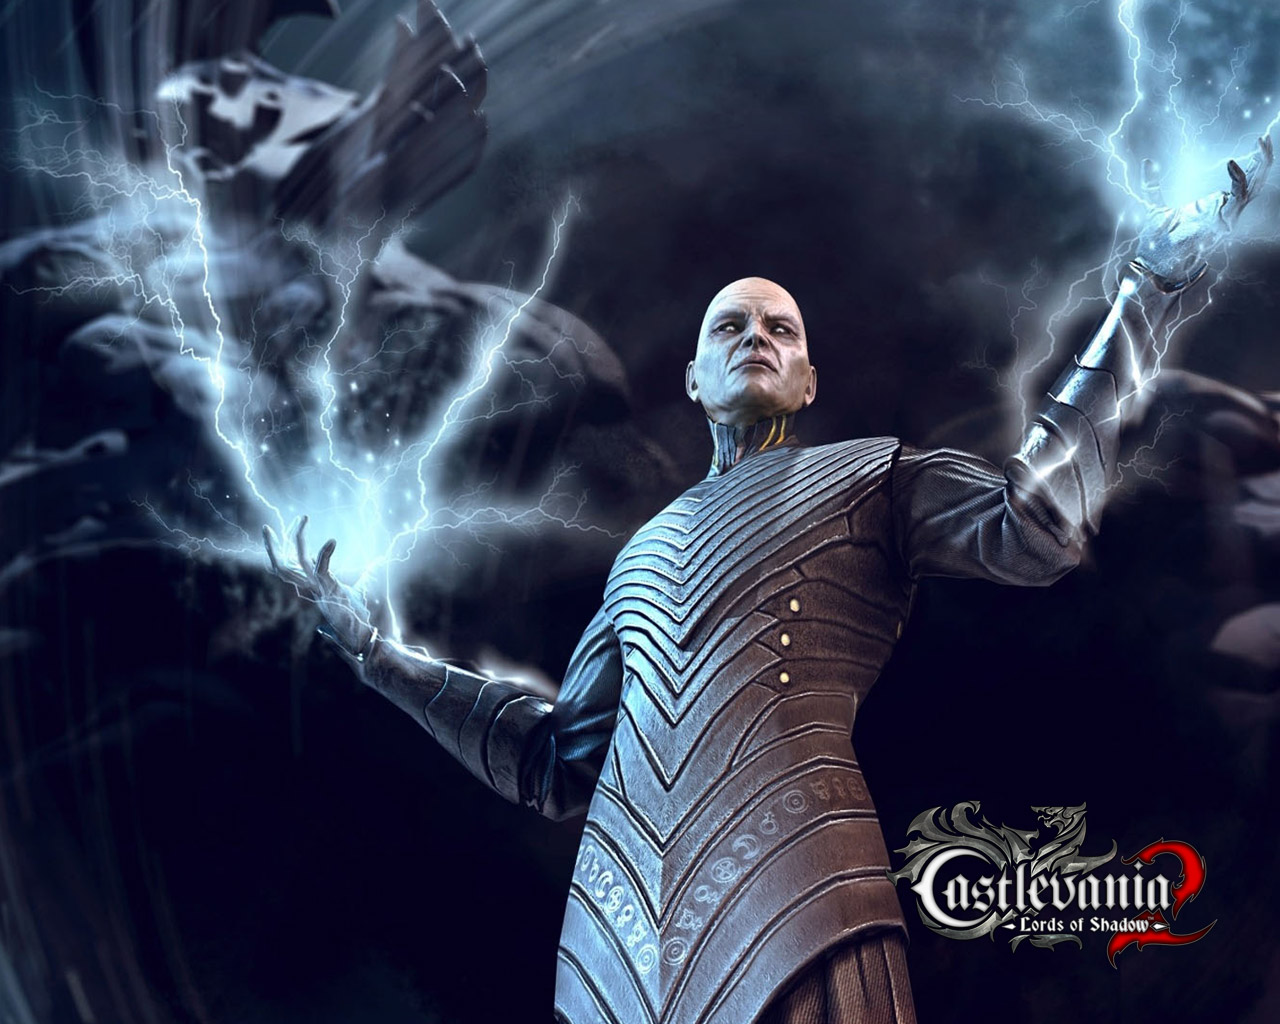 Free Castlevania Lords of Shadow 2 Wallpaper in 1280x1024